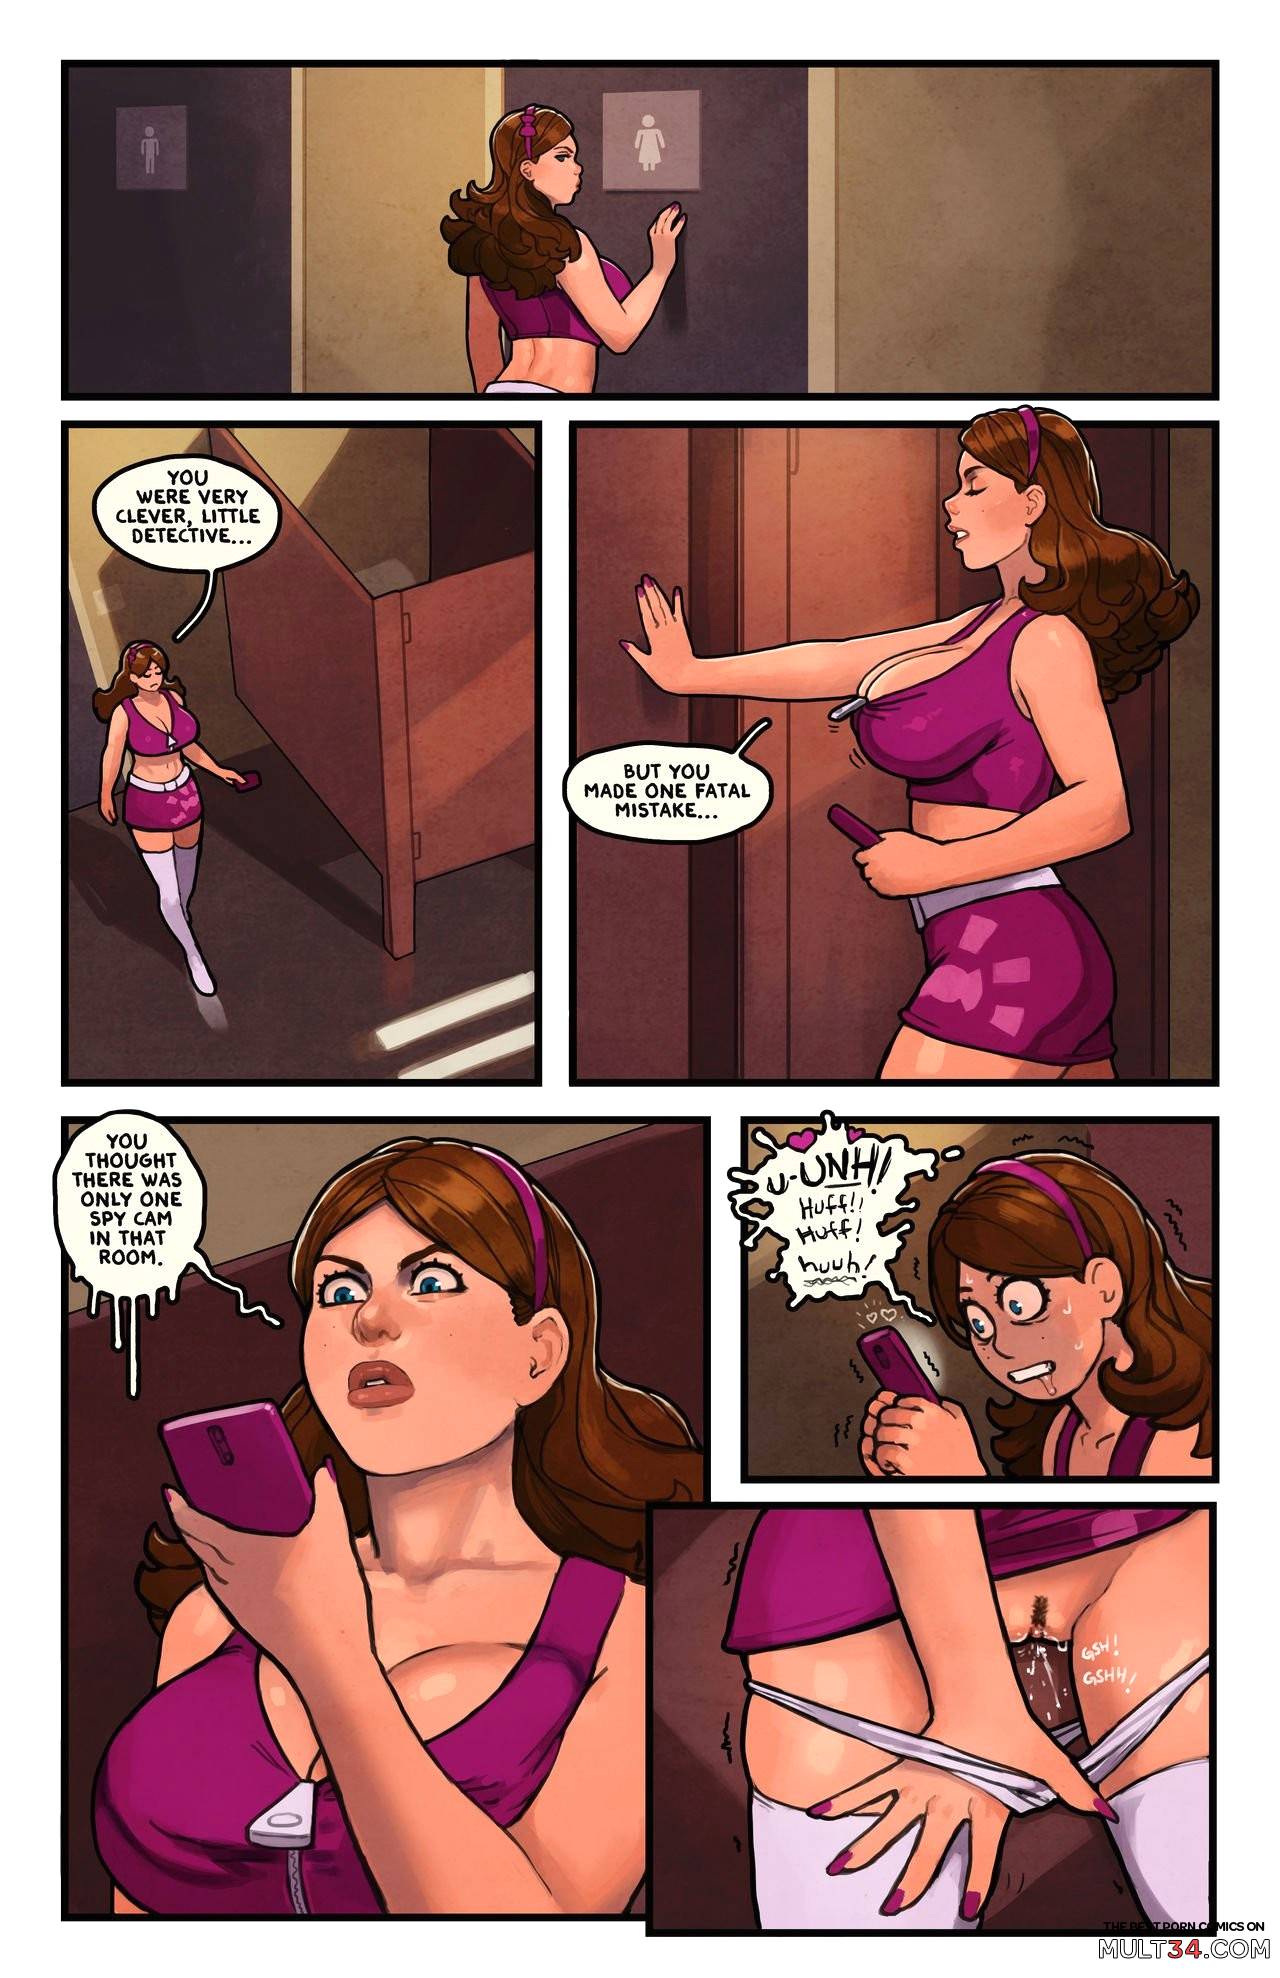 This Romantic World 6 page 46